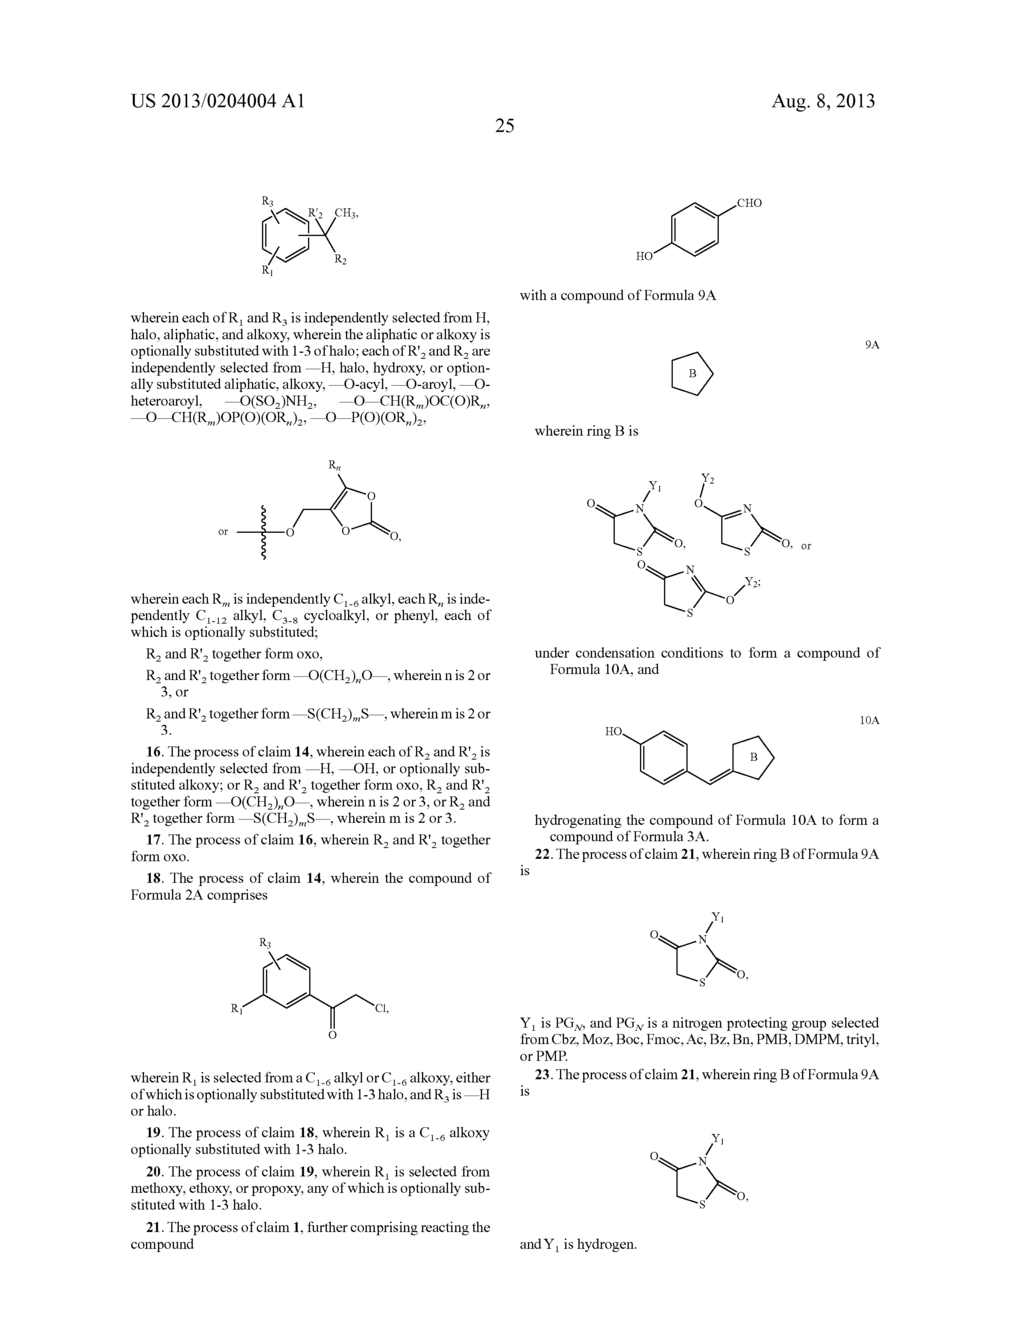 NOVEL SYNTHESIS FOR THIAZOLIDINEDIONE COMPOUNDS - diagram, schematic, and image 26